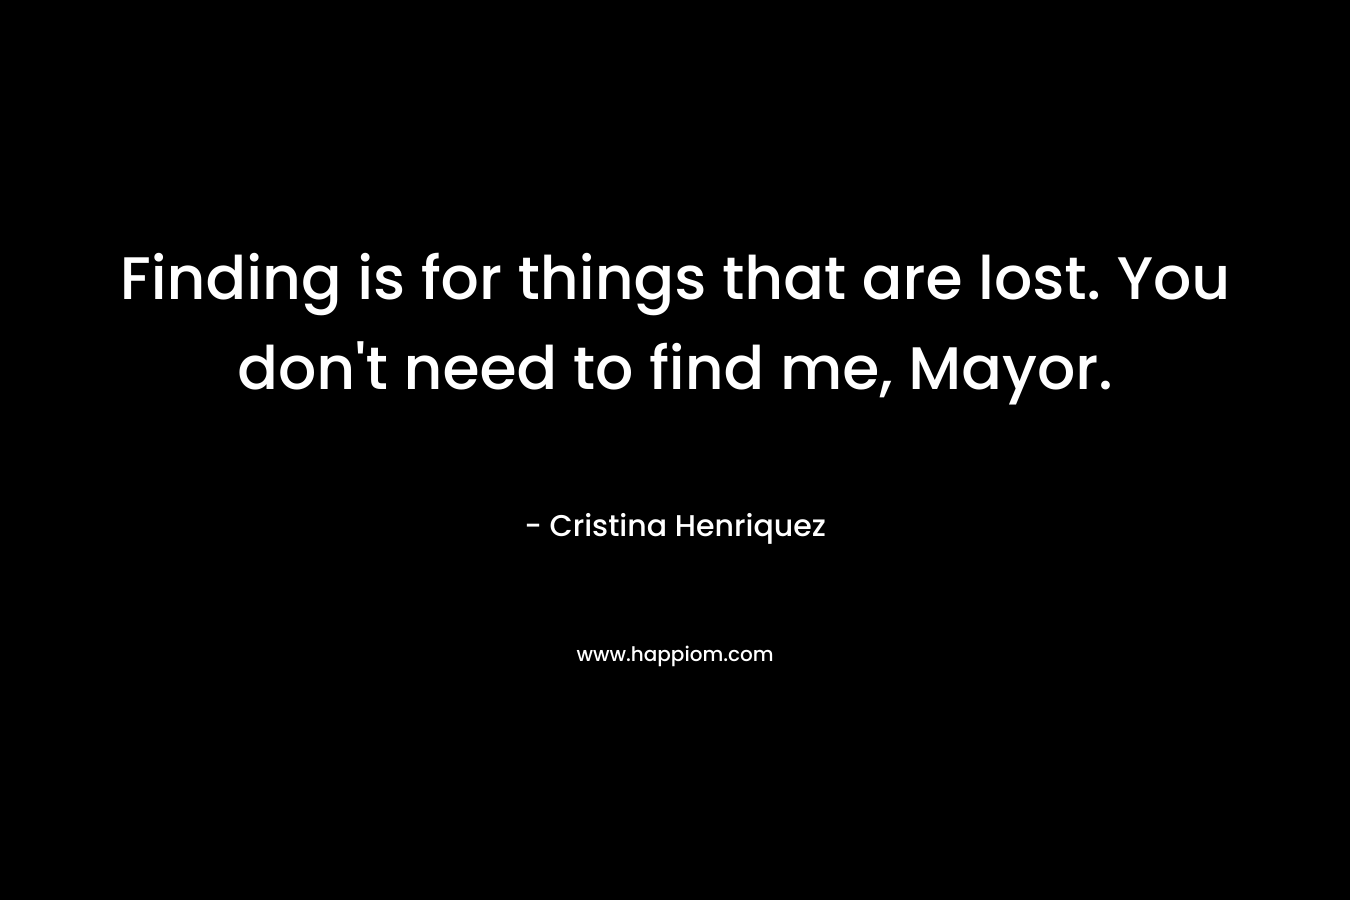 Finding is for things that are lost. You don't need to find me, Mayor.